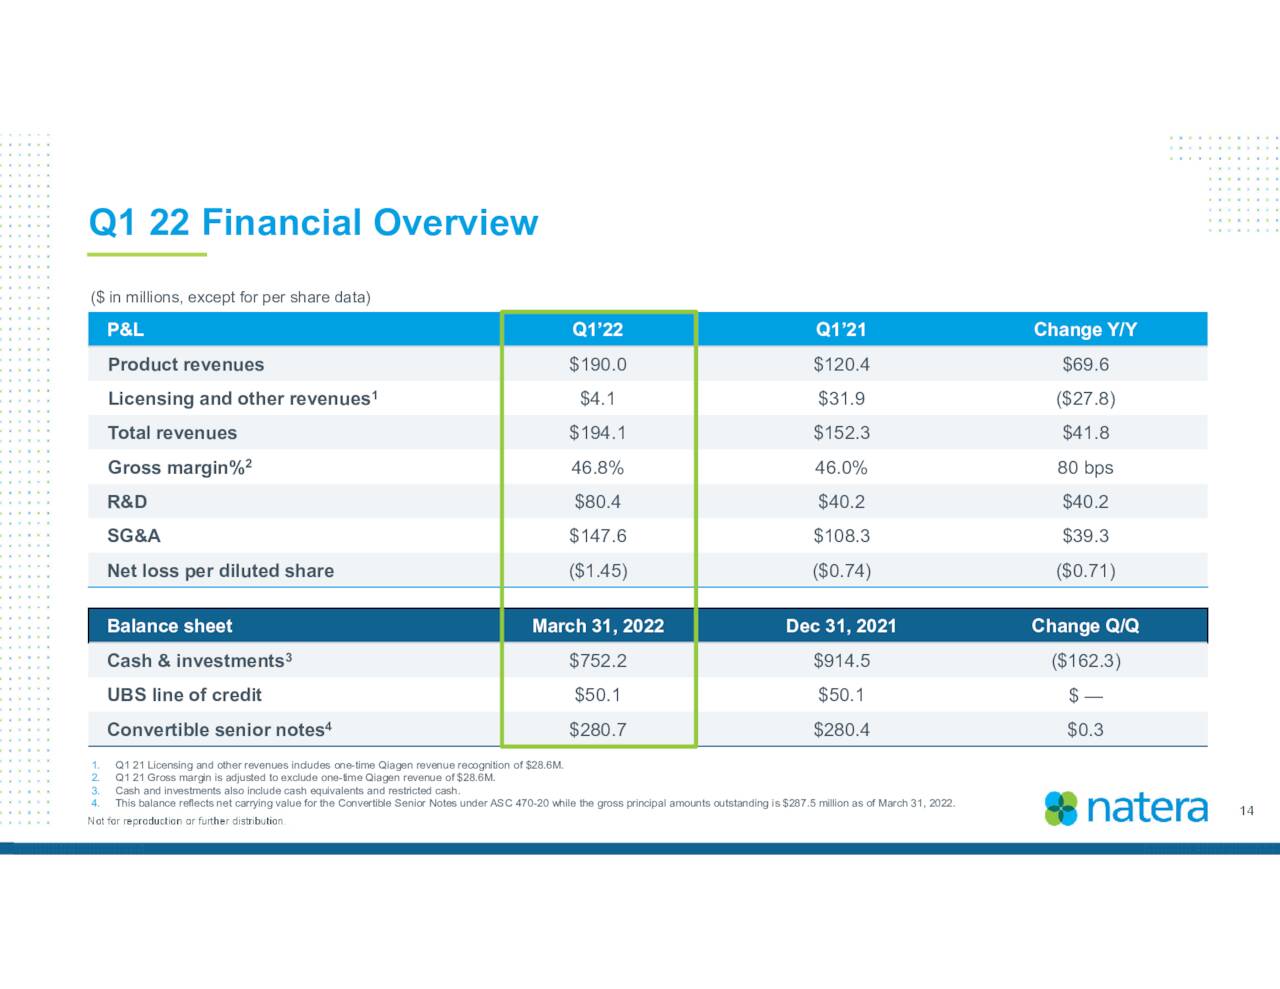 Financial Overview